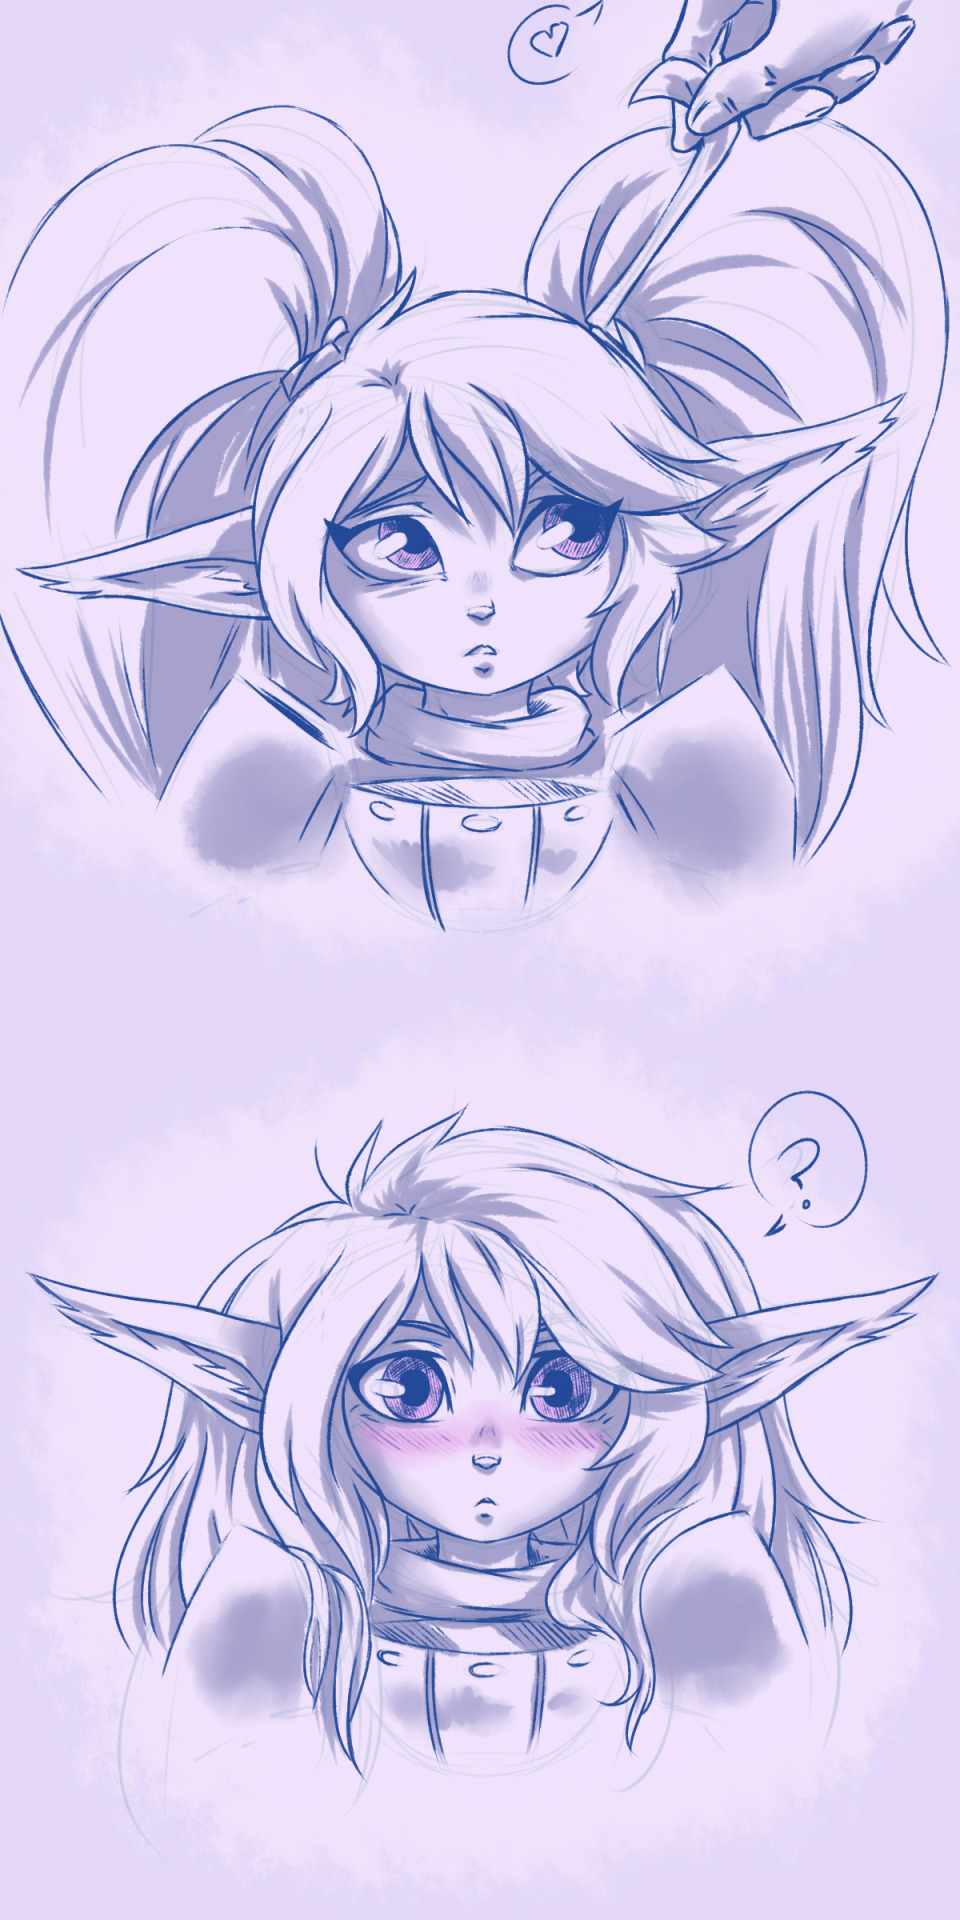 Yordle girls. They should add an evil girl yordle. For reasons. Bandlebro unfortunately